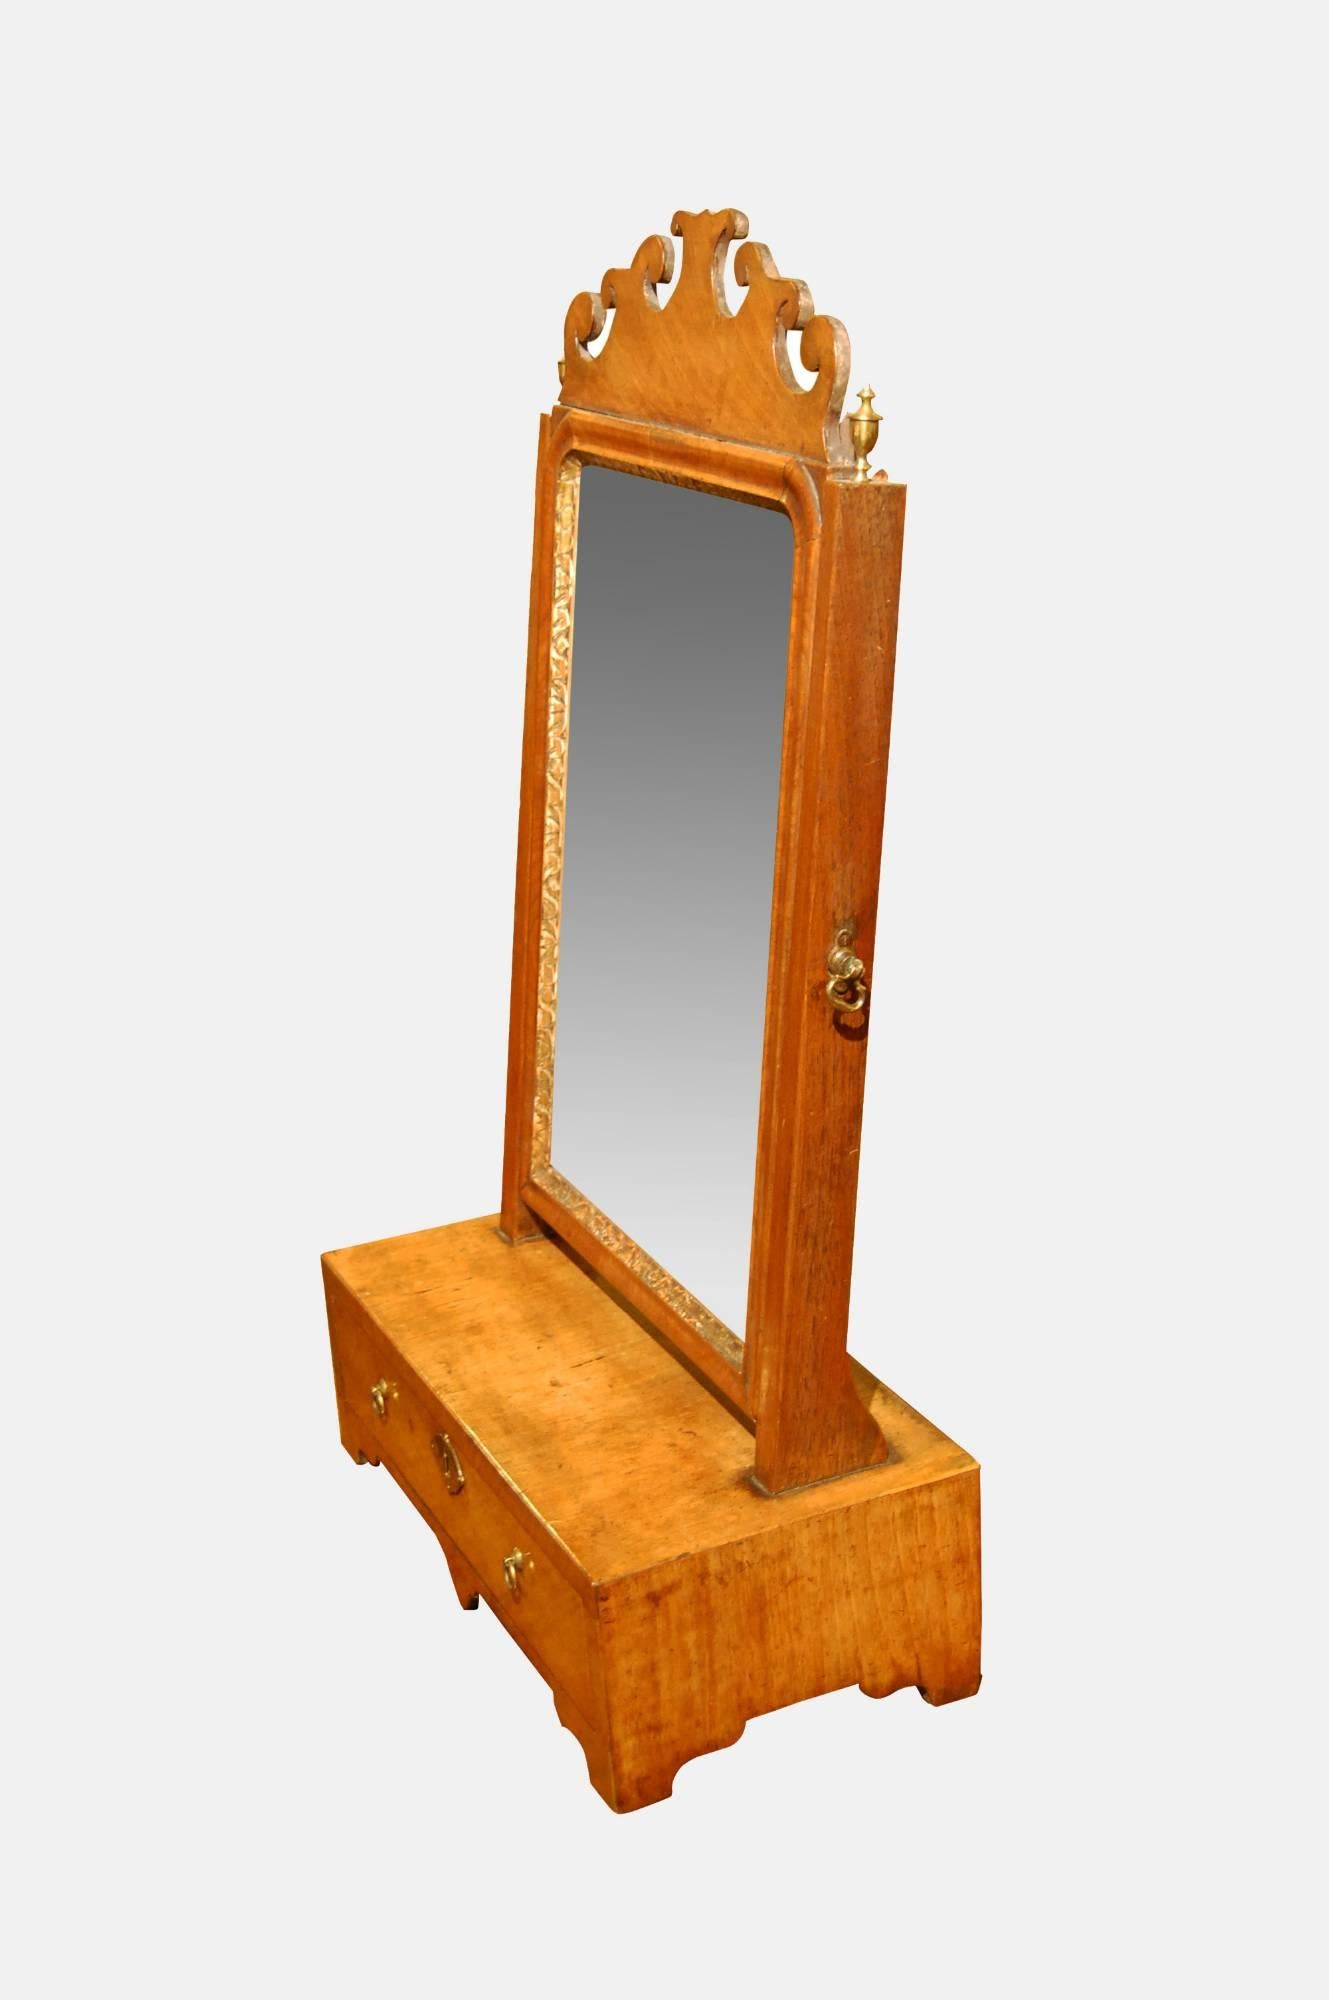 Queen Anne walnut box base mirror.

Crested frame with original plate above a single drawer retaining original brassware and lock,

circa 1710.